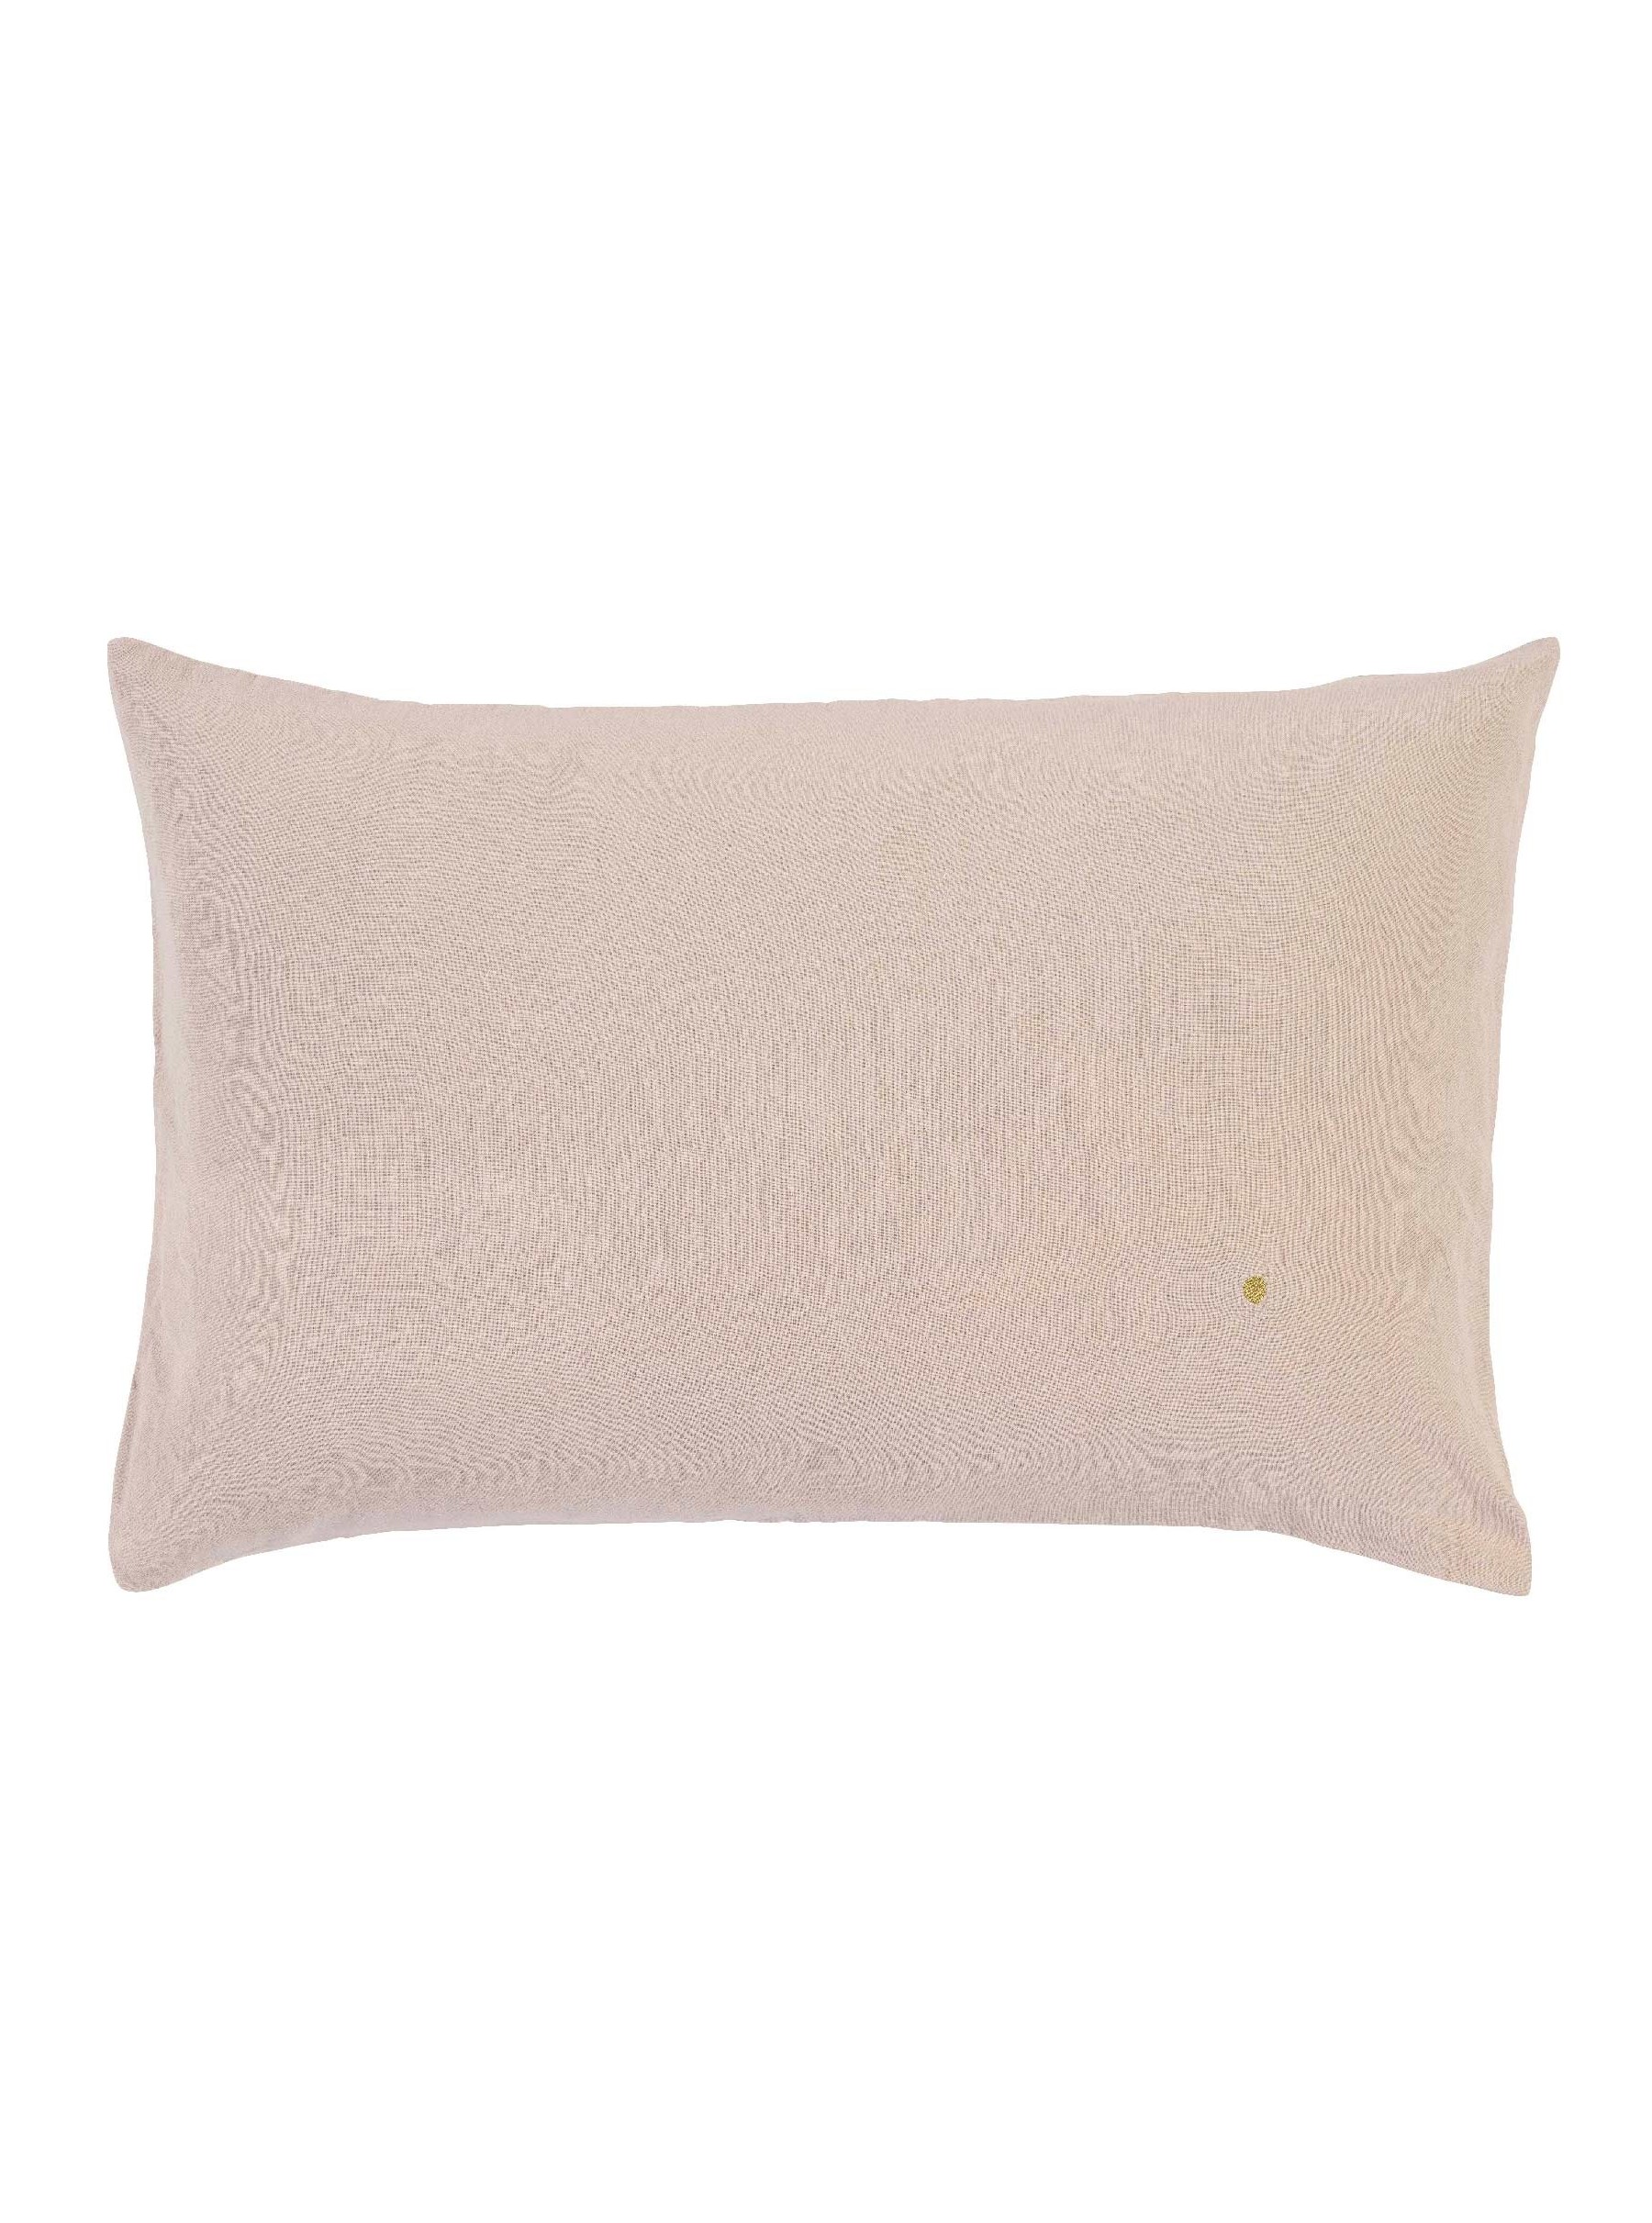 CUSHION COVER MONA BISCUIT 40